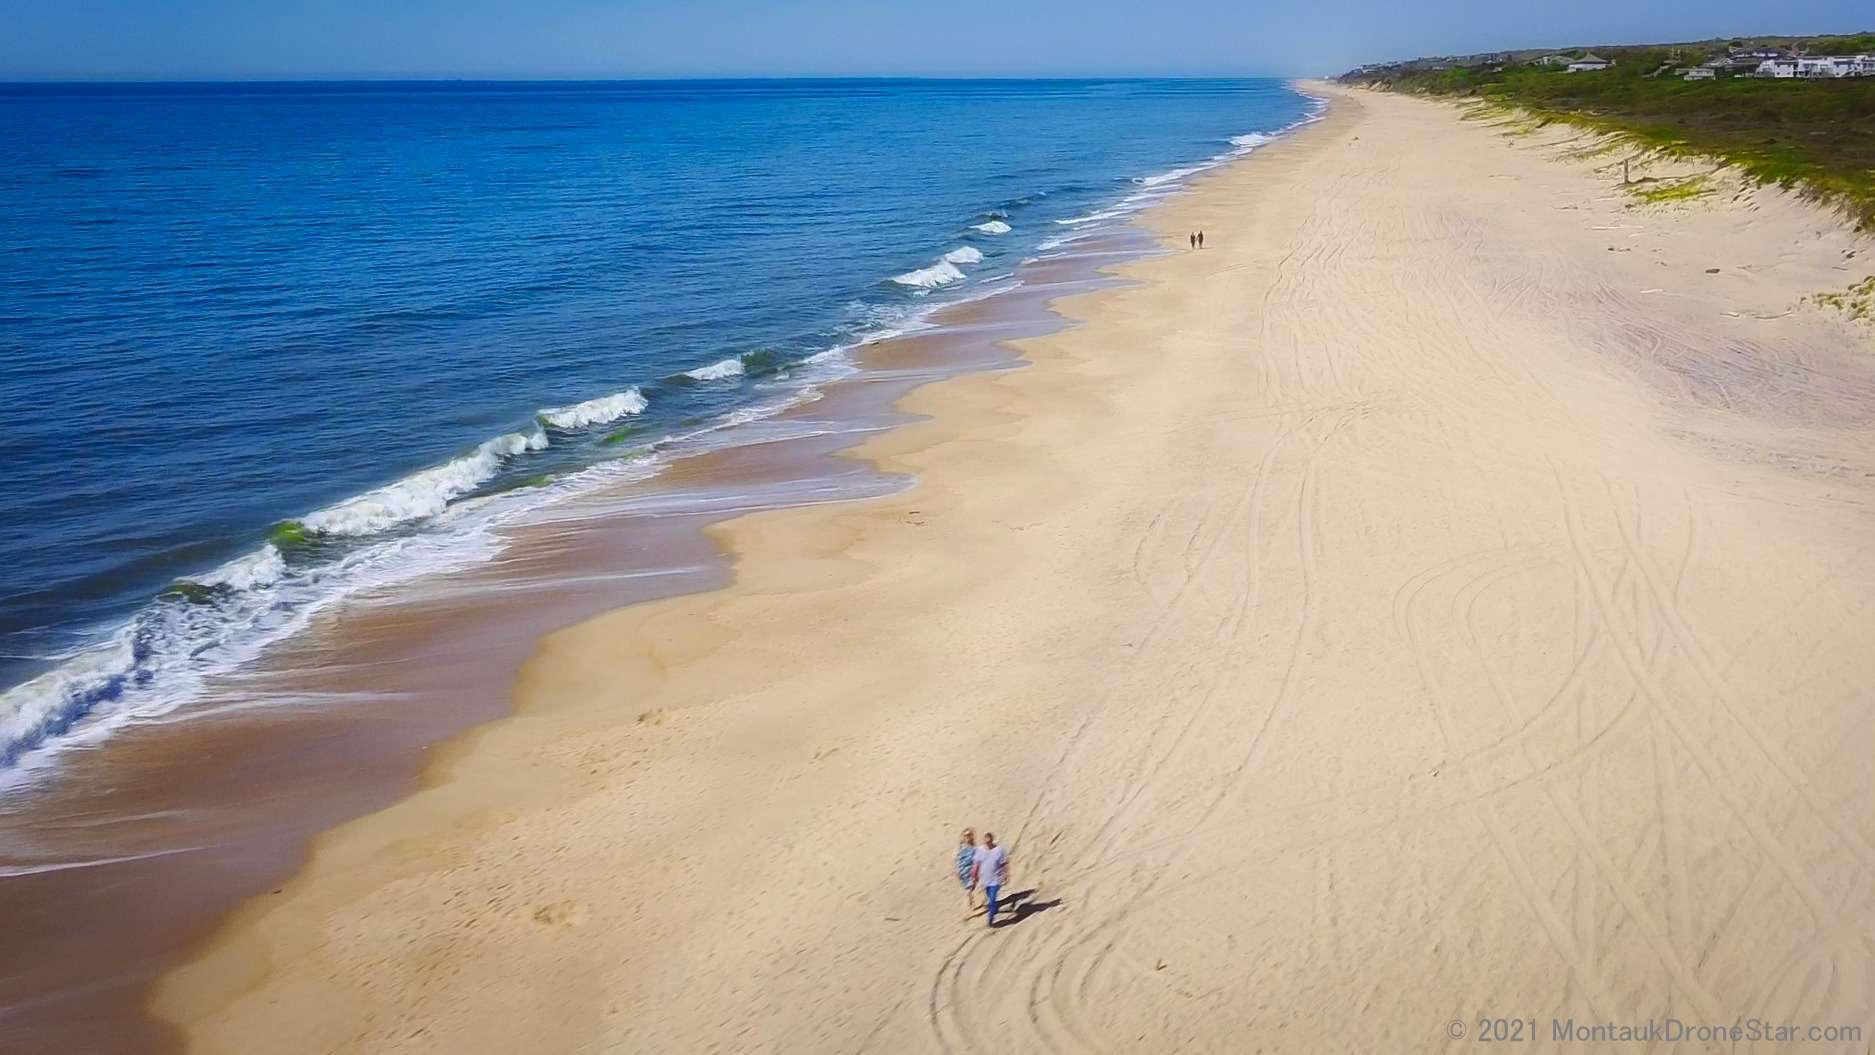 Montauk's beautiful ocean beach stretches for miles from Ditch Plains to Hither Hills